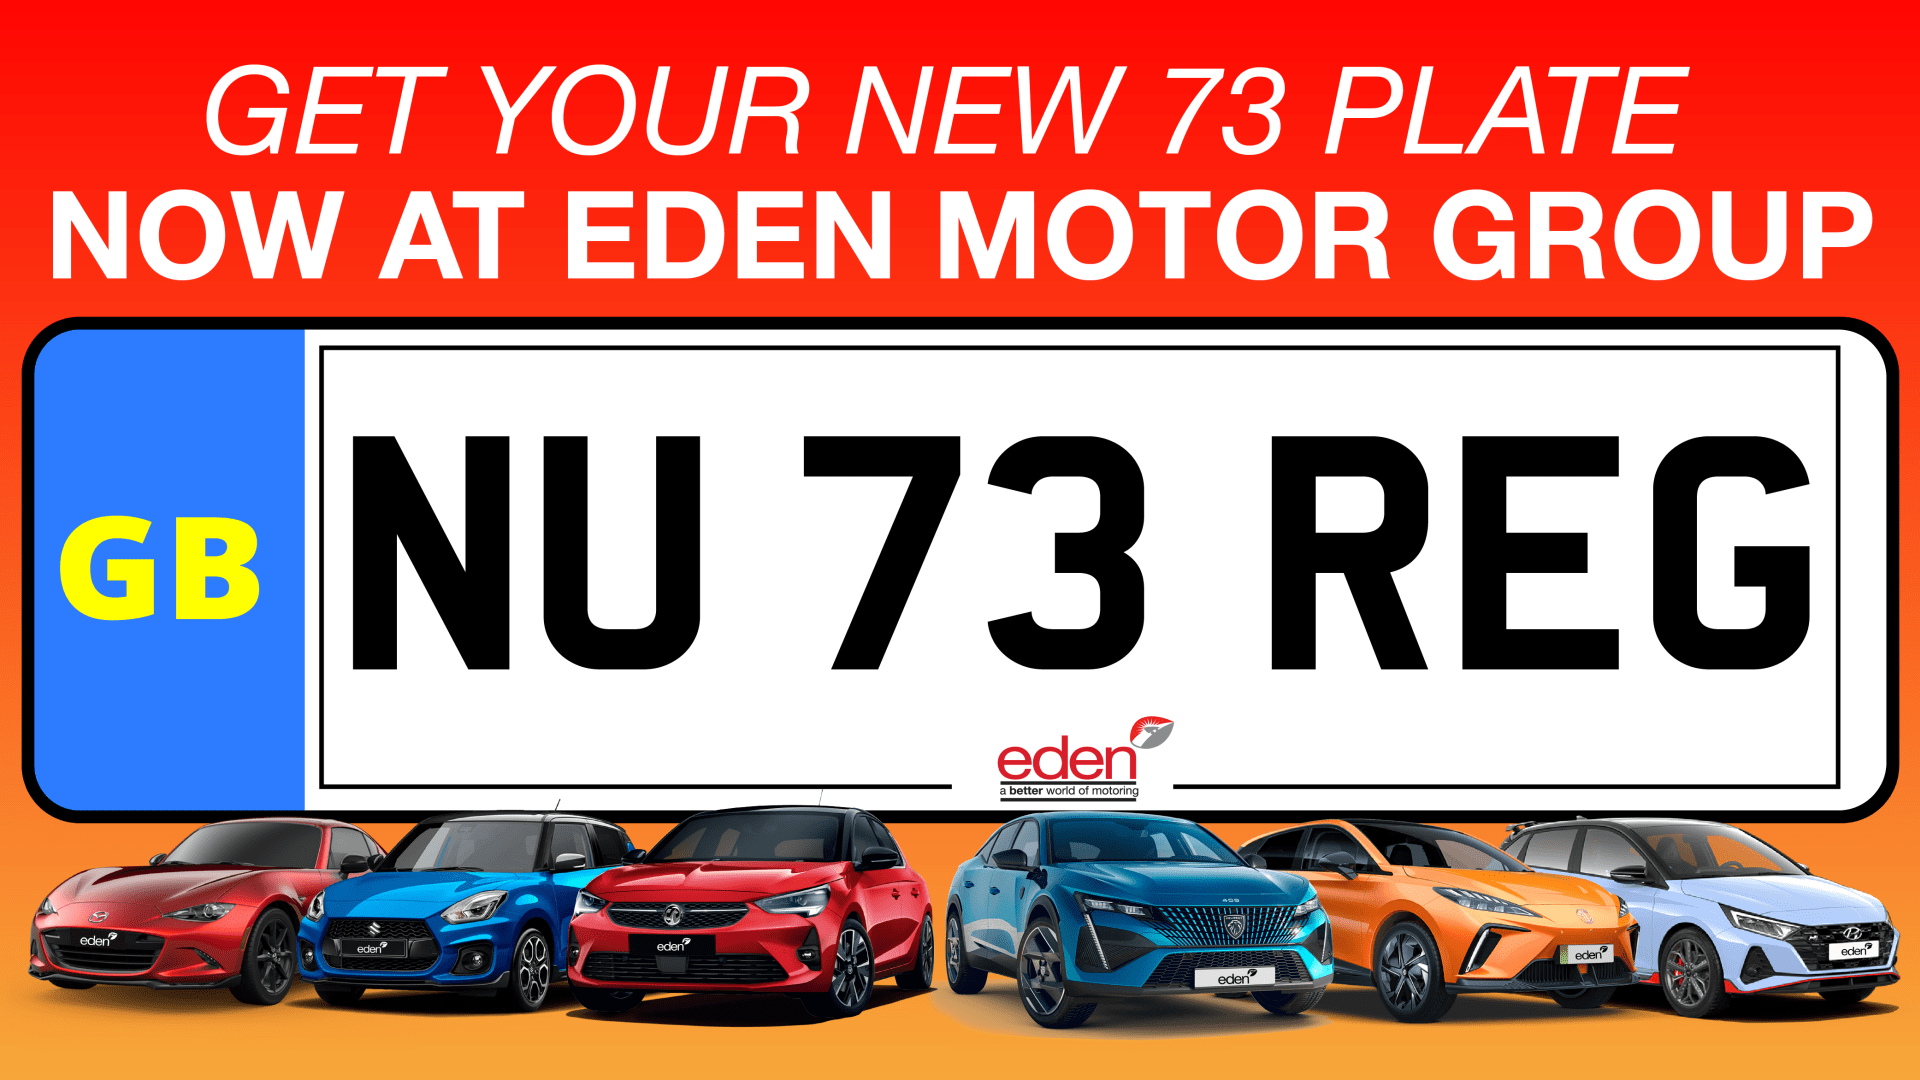 Get Your New 73 Plate NOW